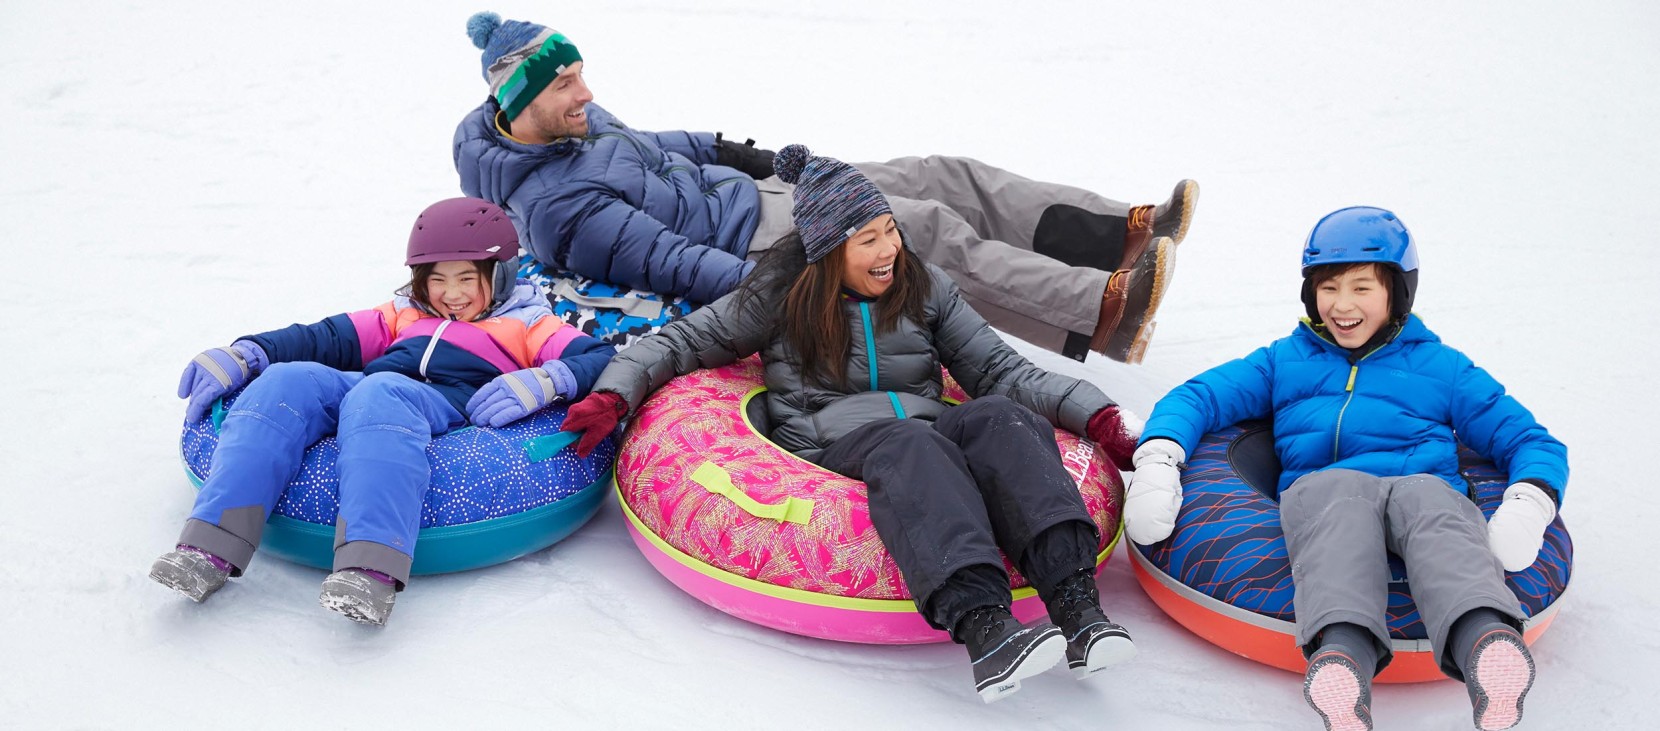 Smiling family of 4 on Sonic Snow Tubes.